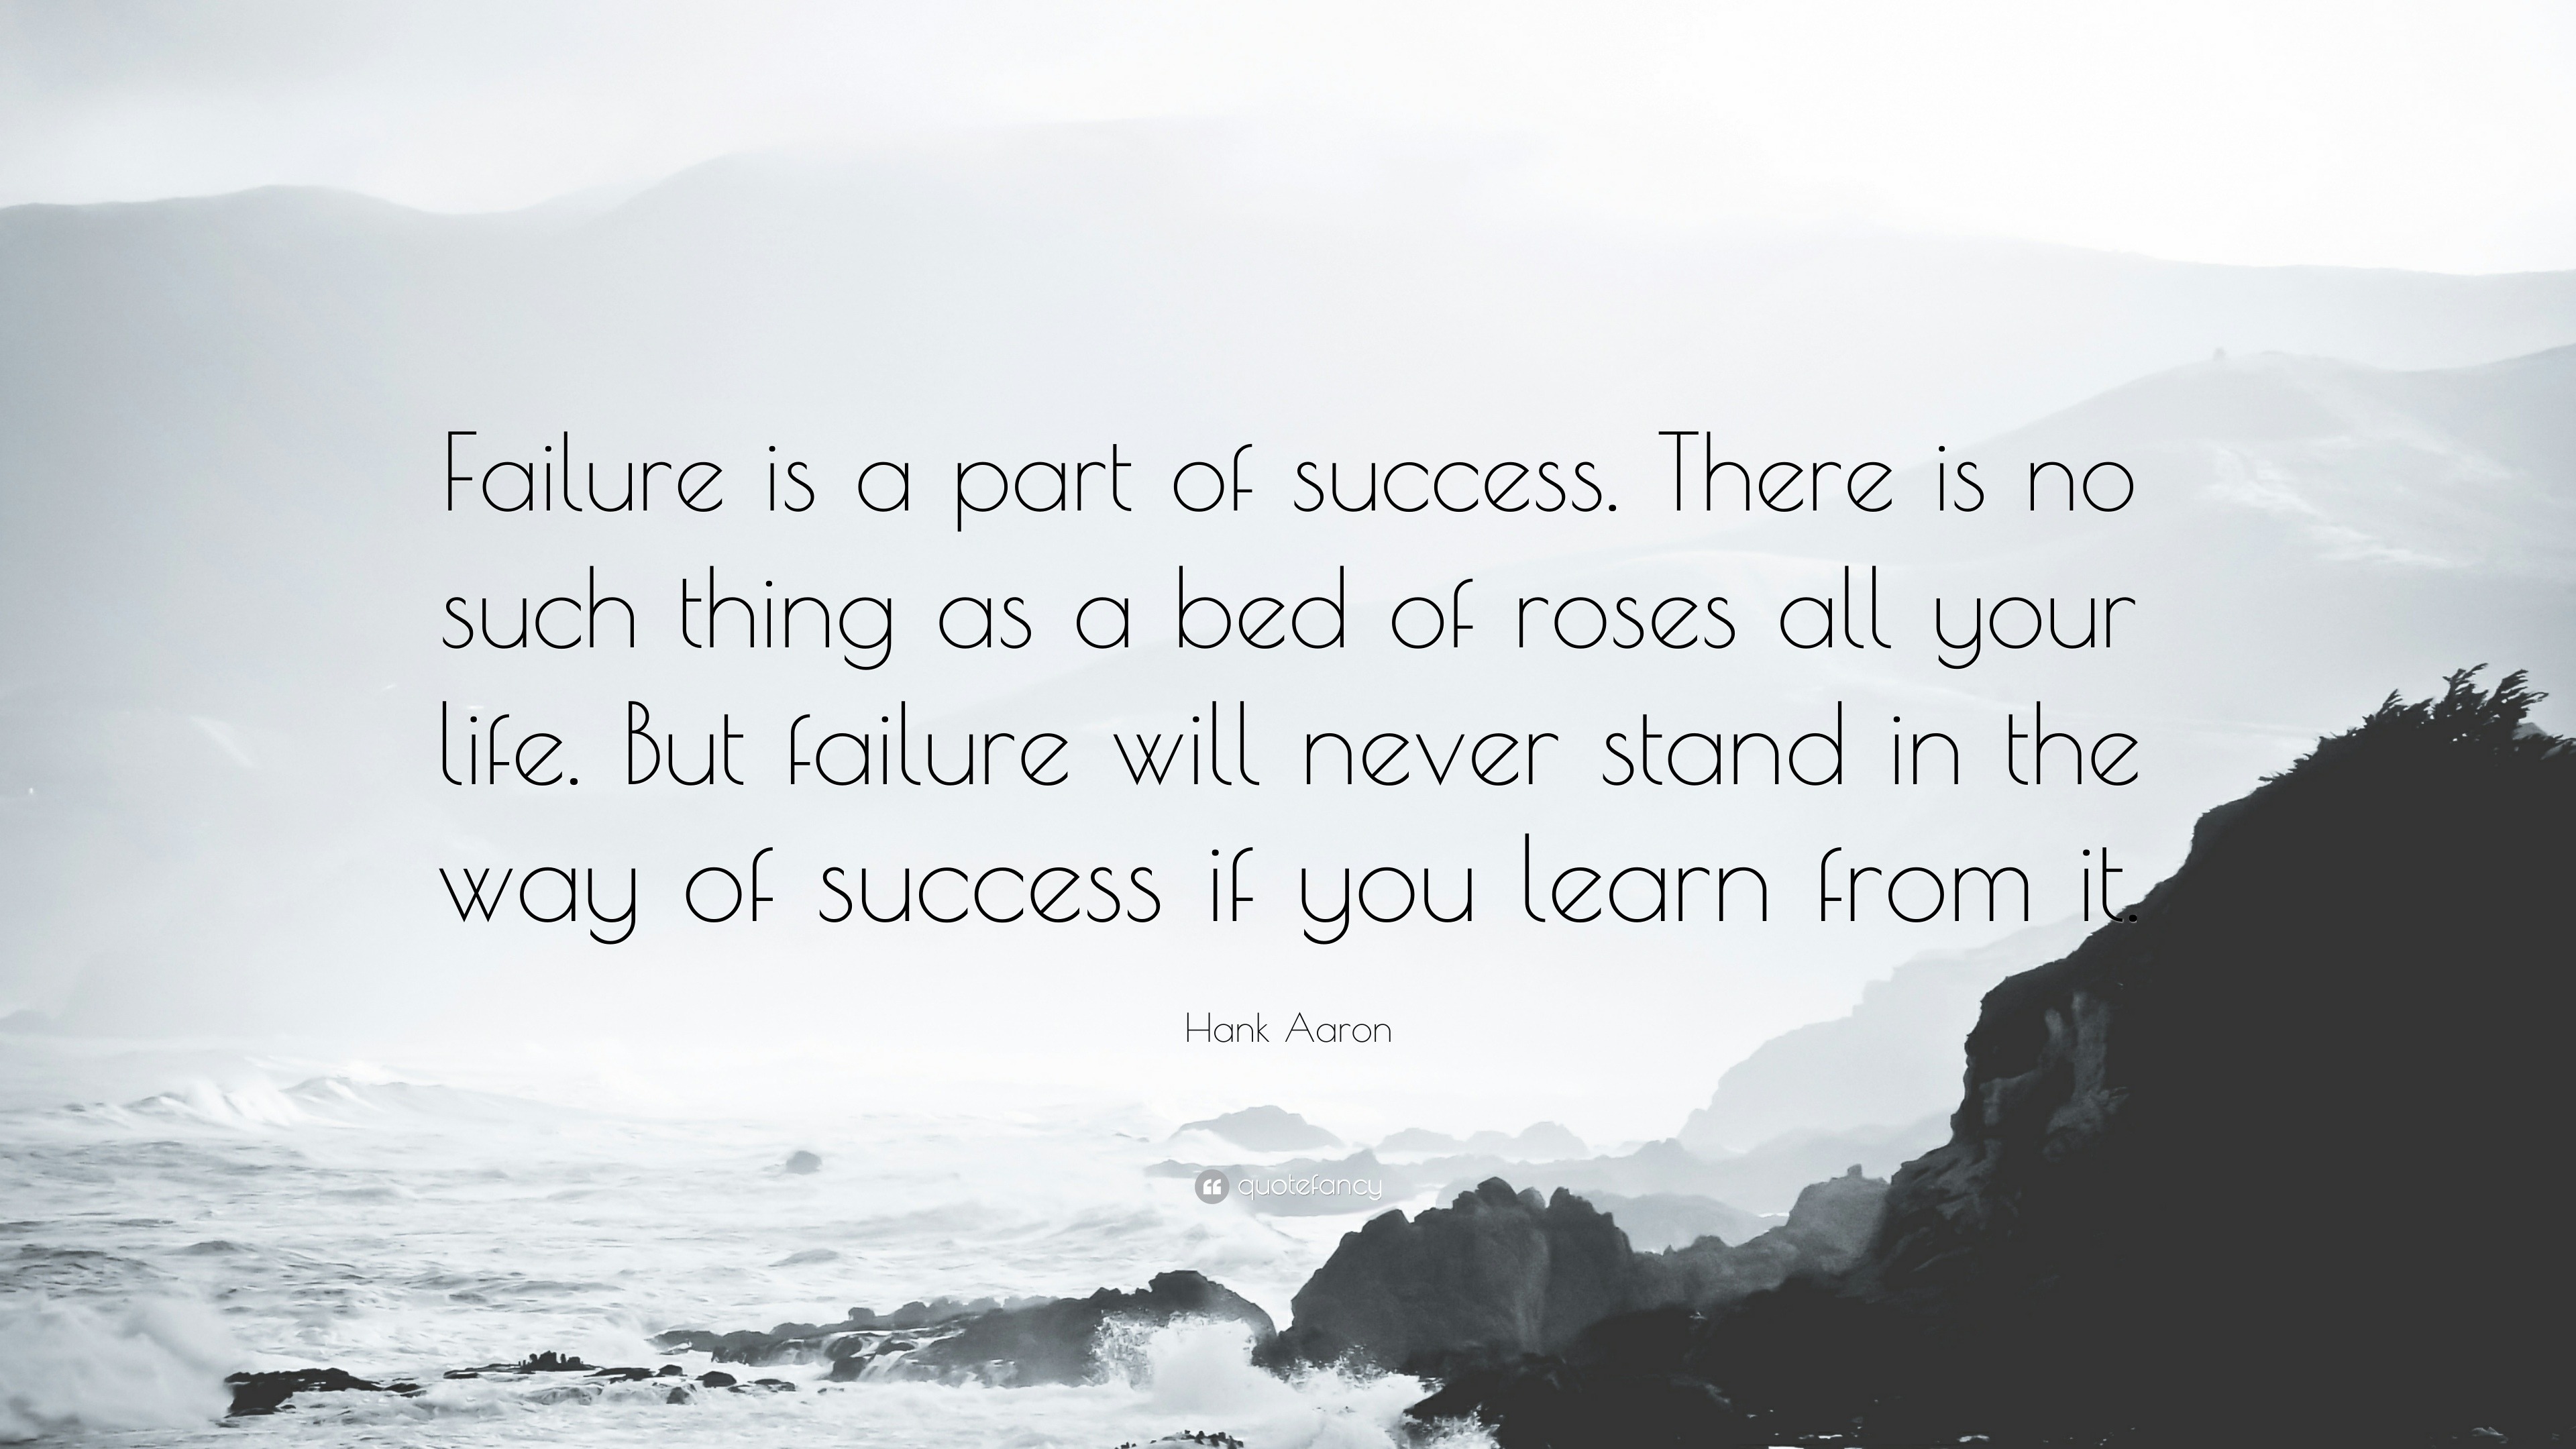 Hank Aaron Quote: “Failure is a part of success. There is no such